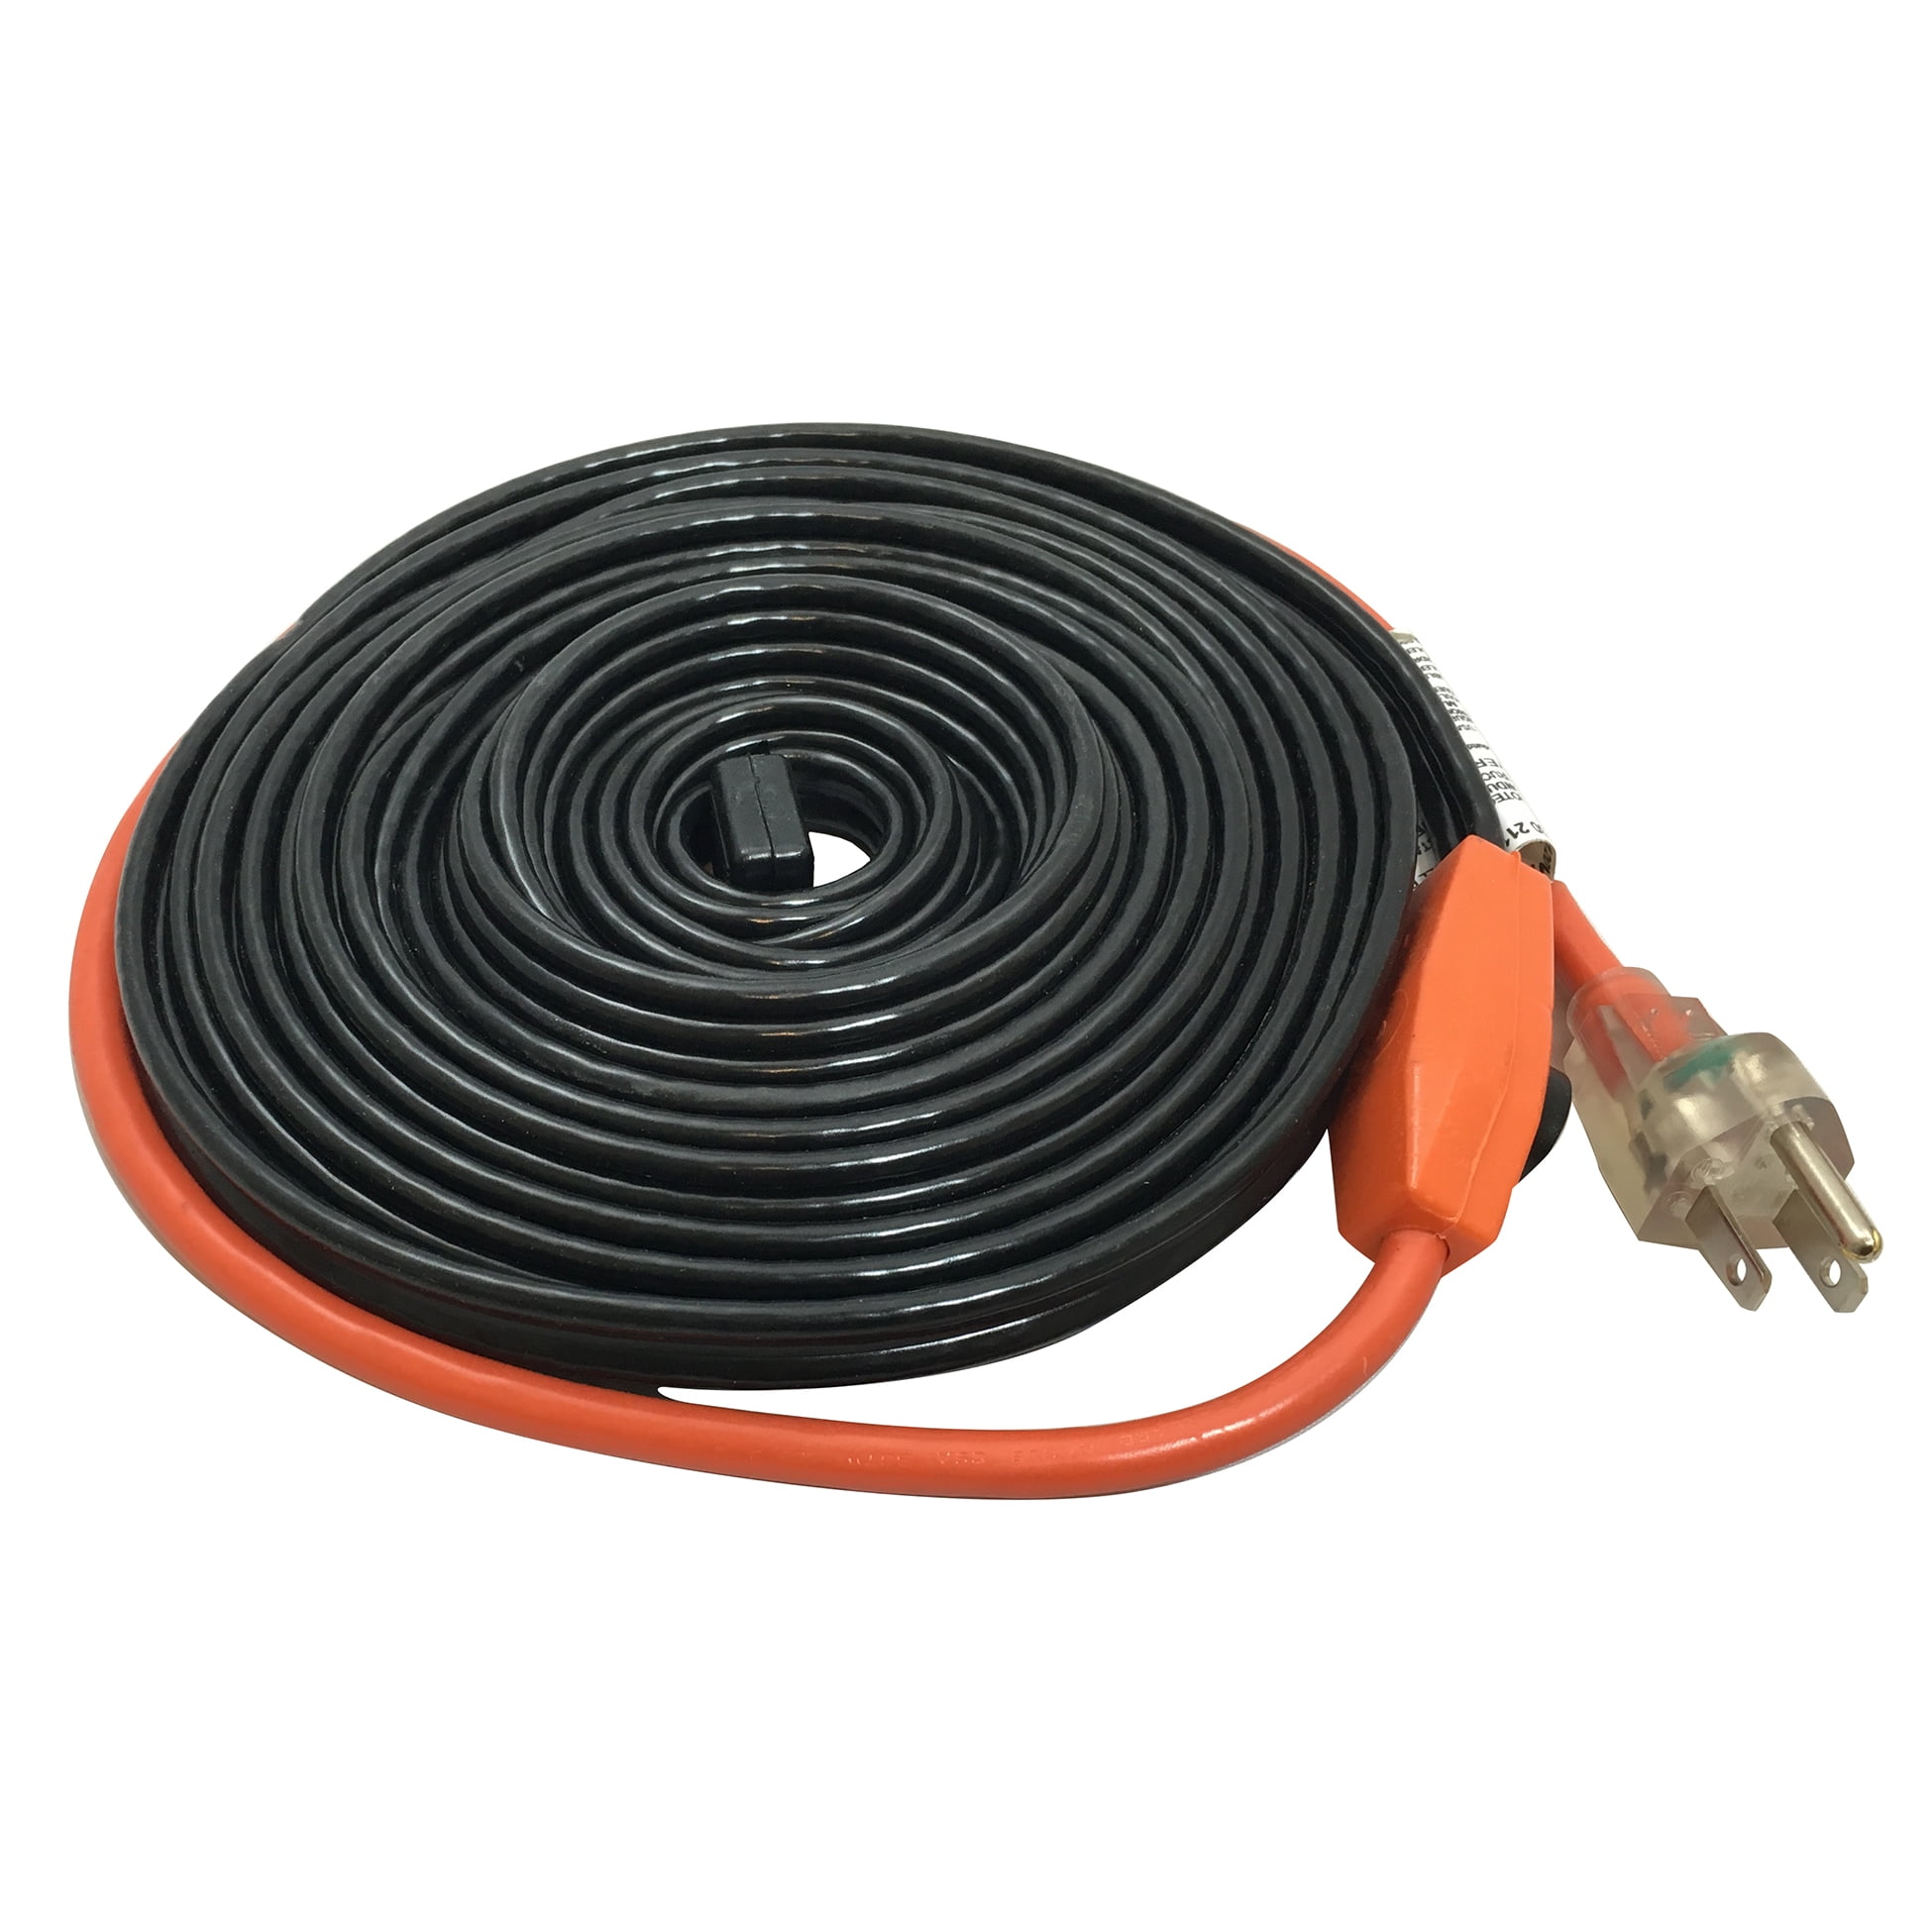 VEVOR Pipe Heating Cable, 9 Feet Water Line Heat Tape with Built